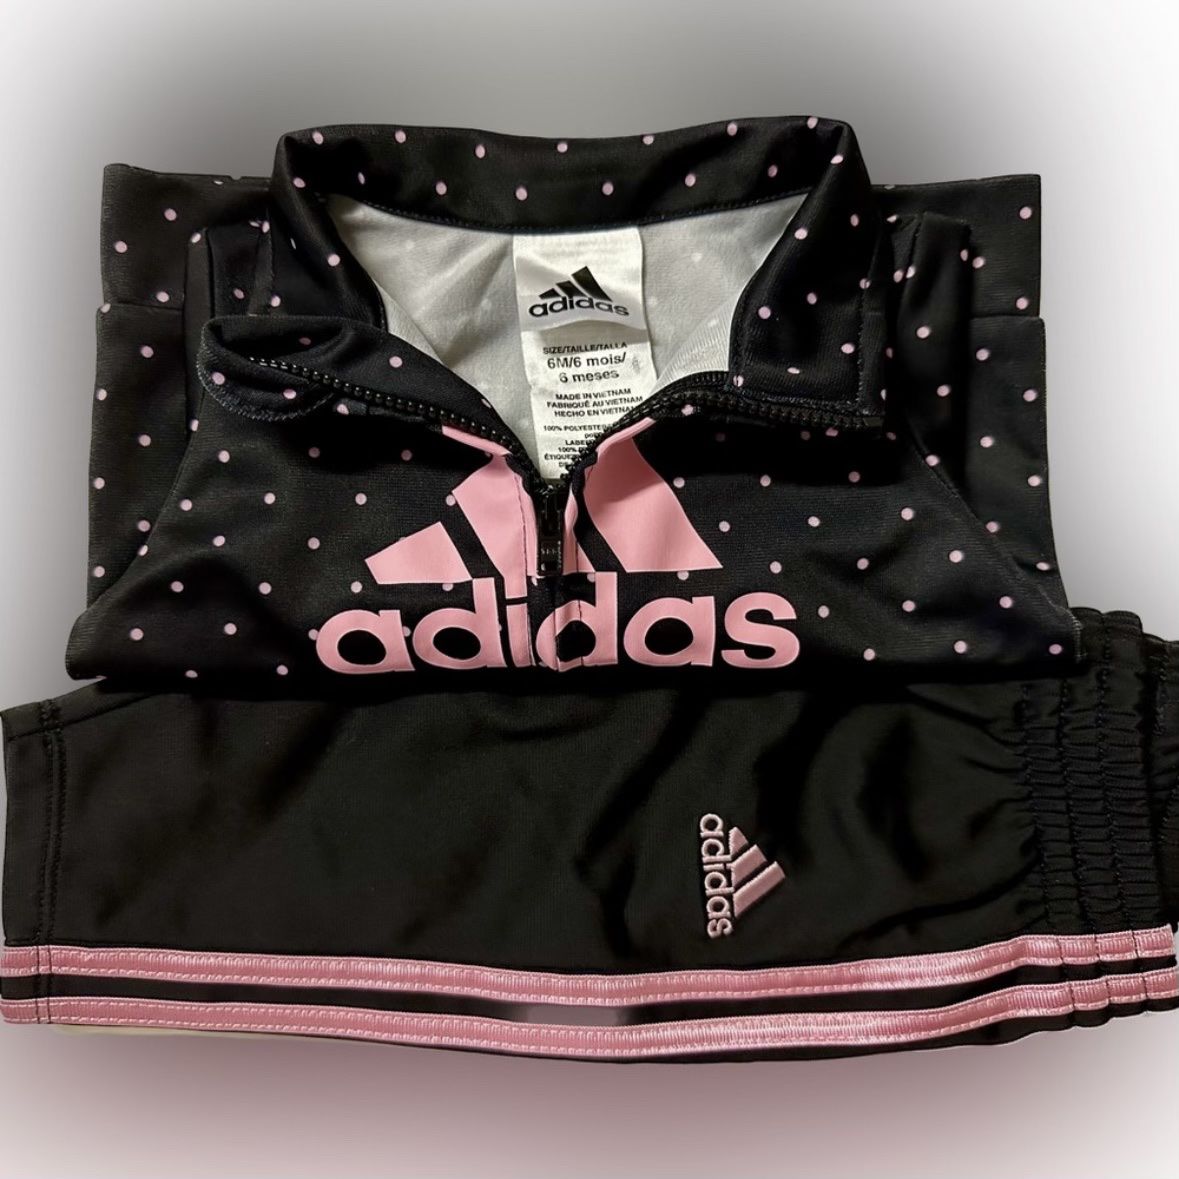 Baby Girls Adidas Tracksuit for in Vallejo, CA OfferUp